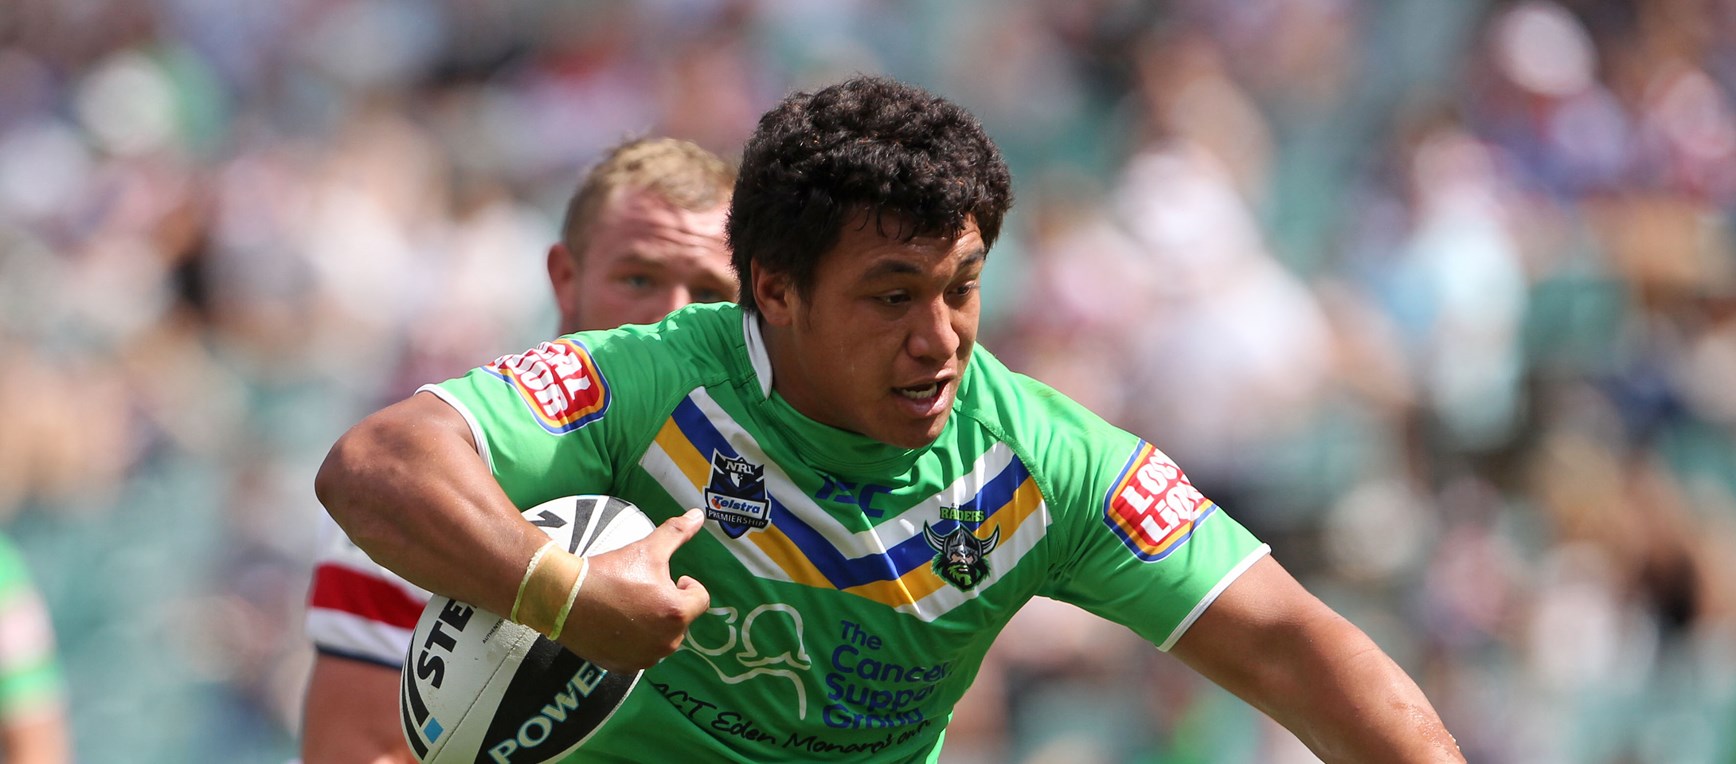 Gallery: Josh Papalii through the years